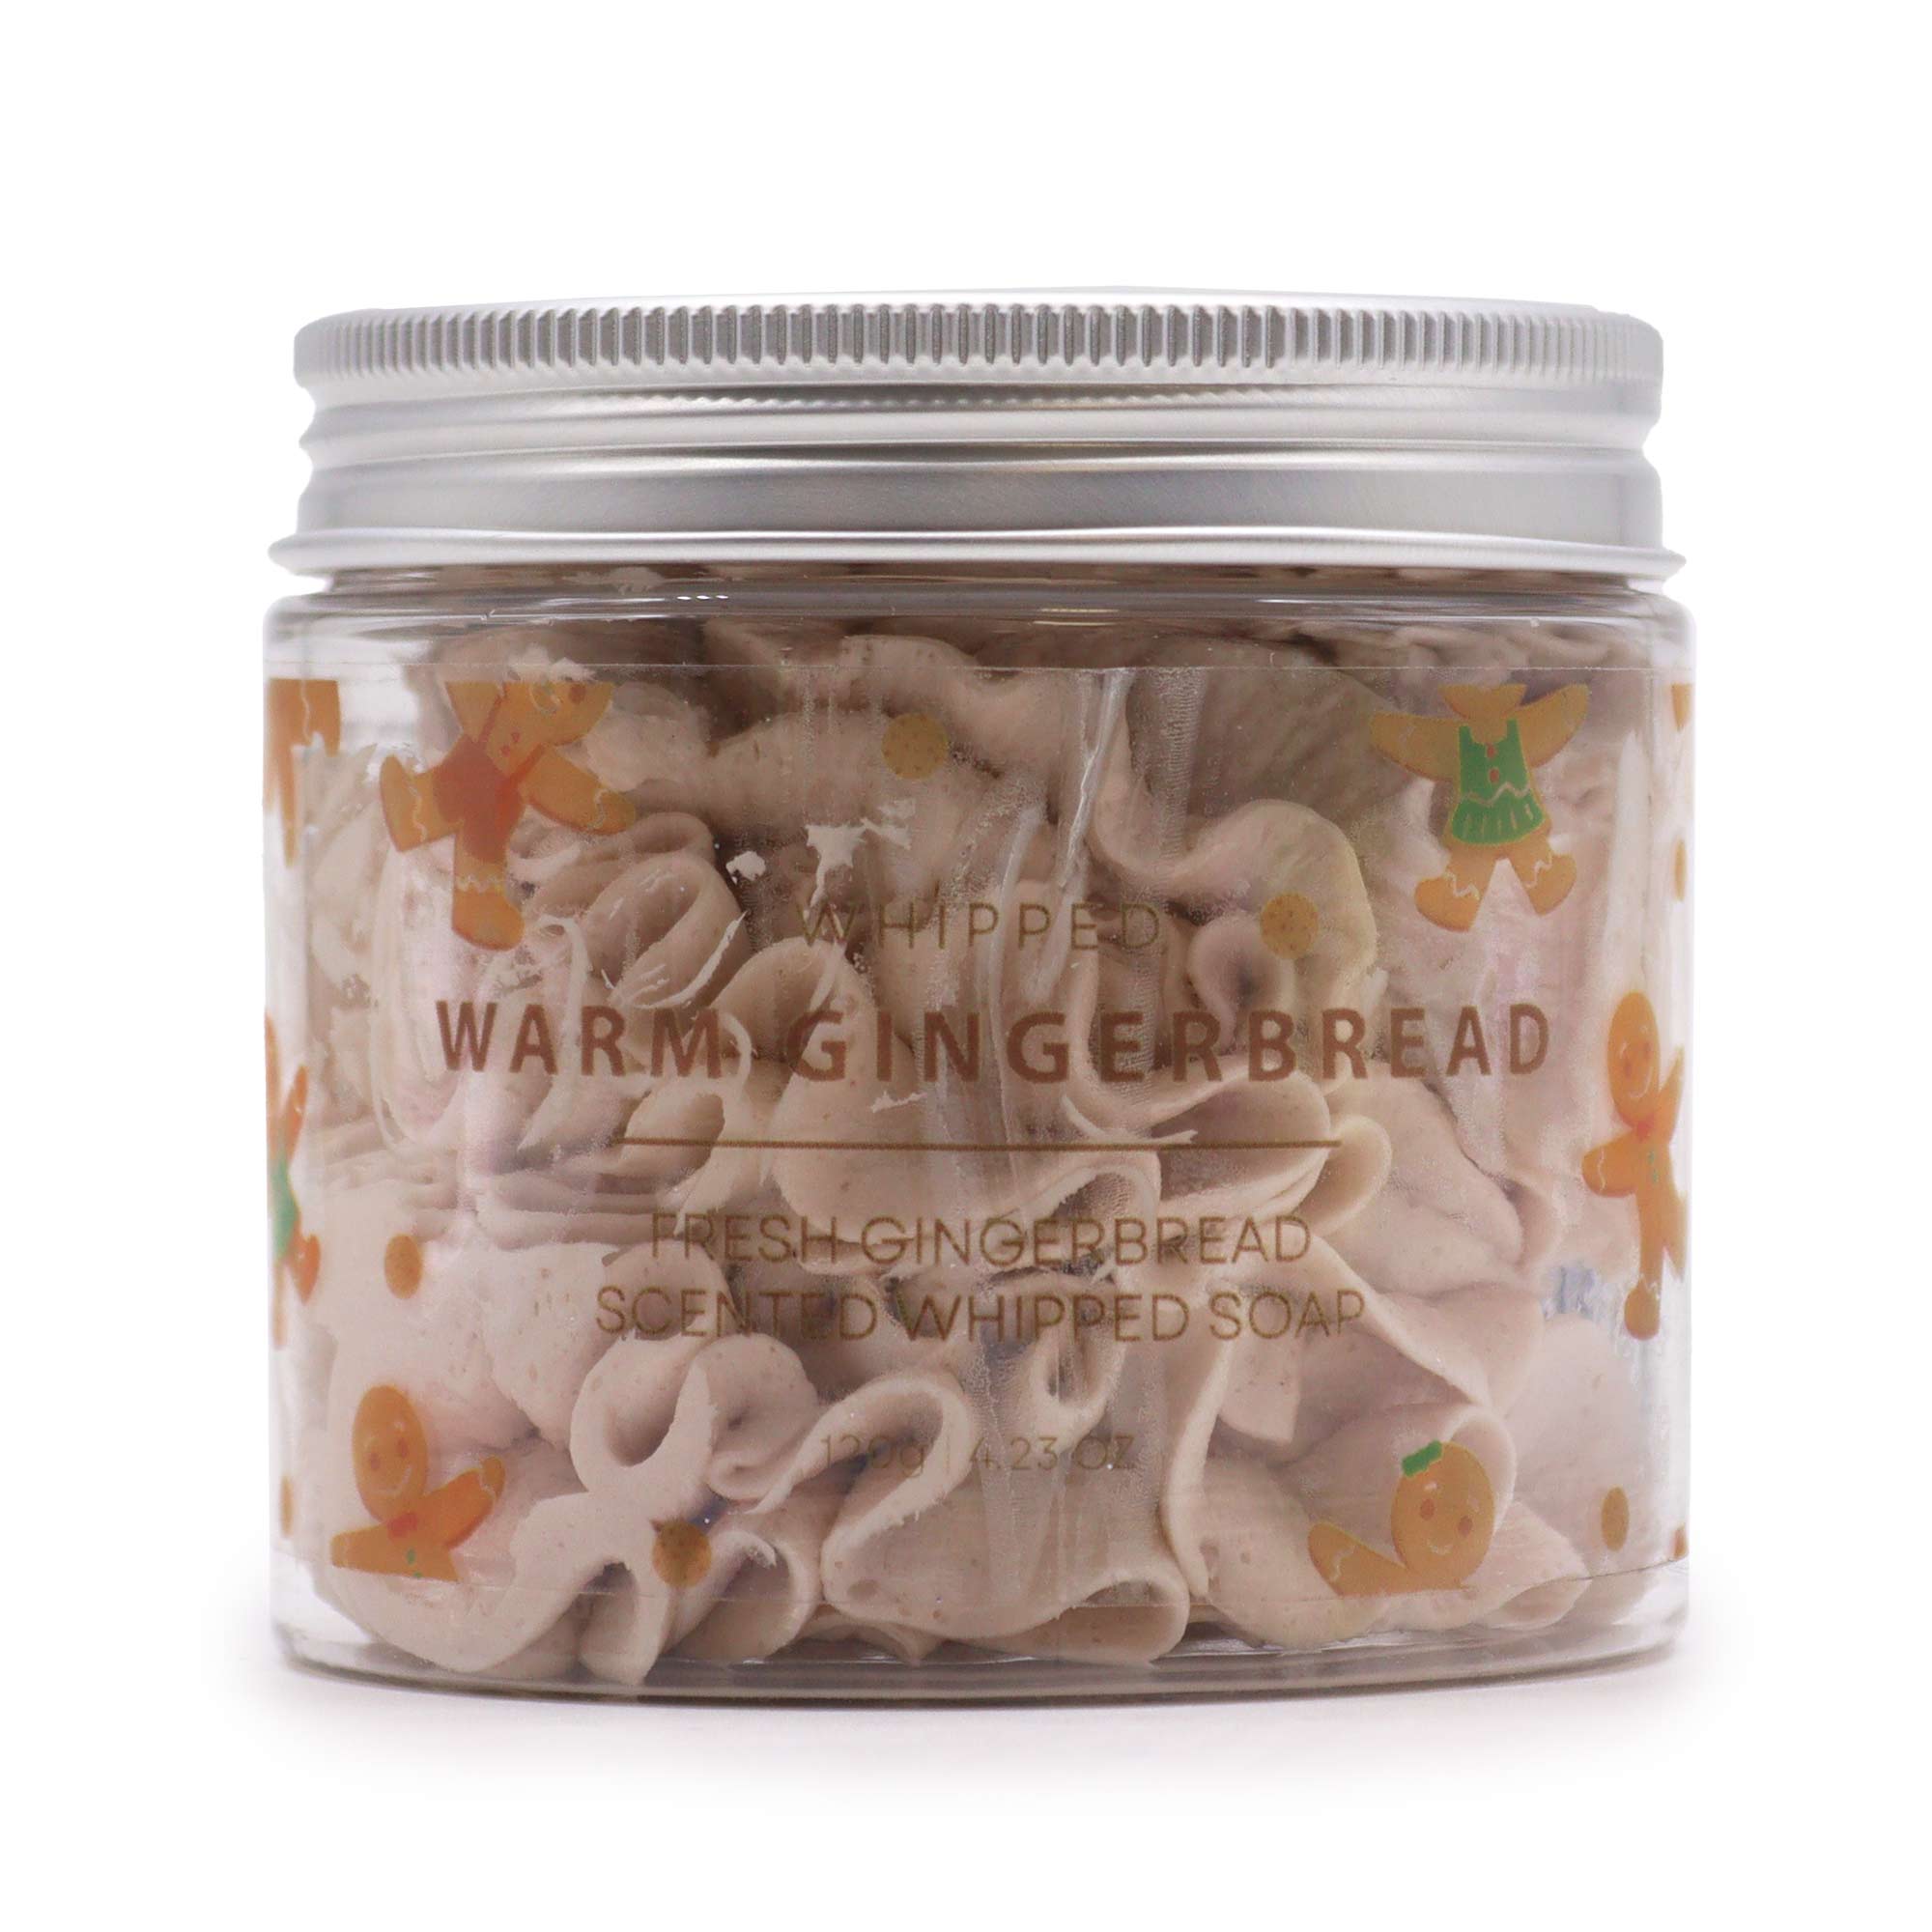 View Warm Gingerbread Whipped Cream Soap 120g information